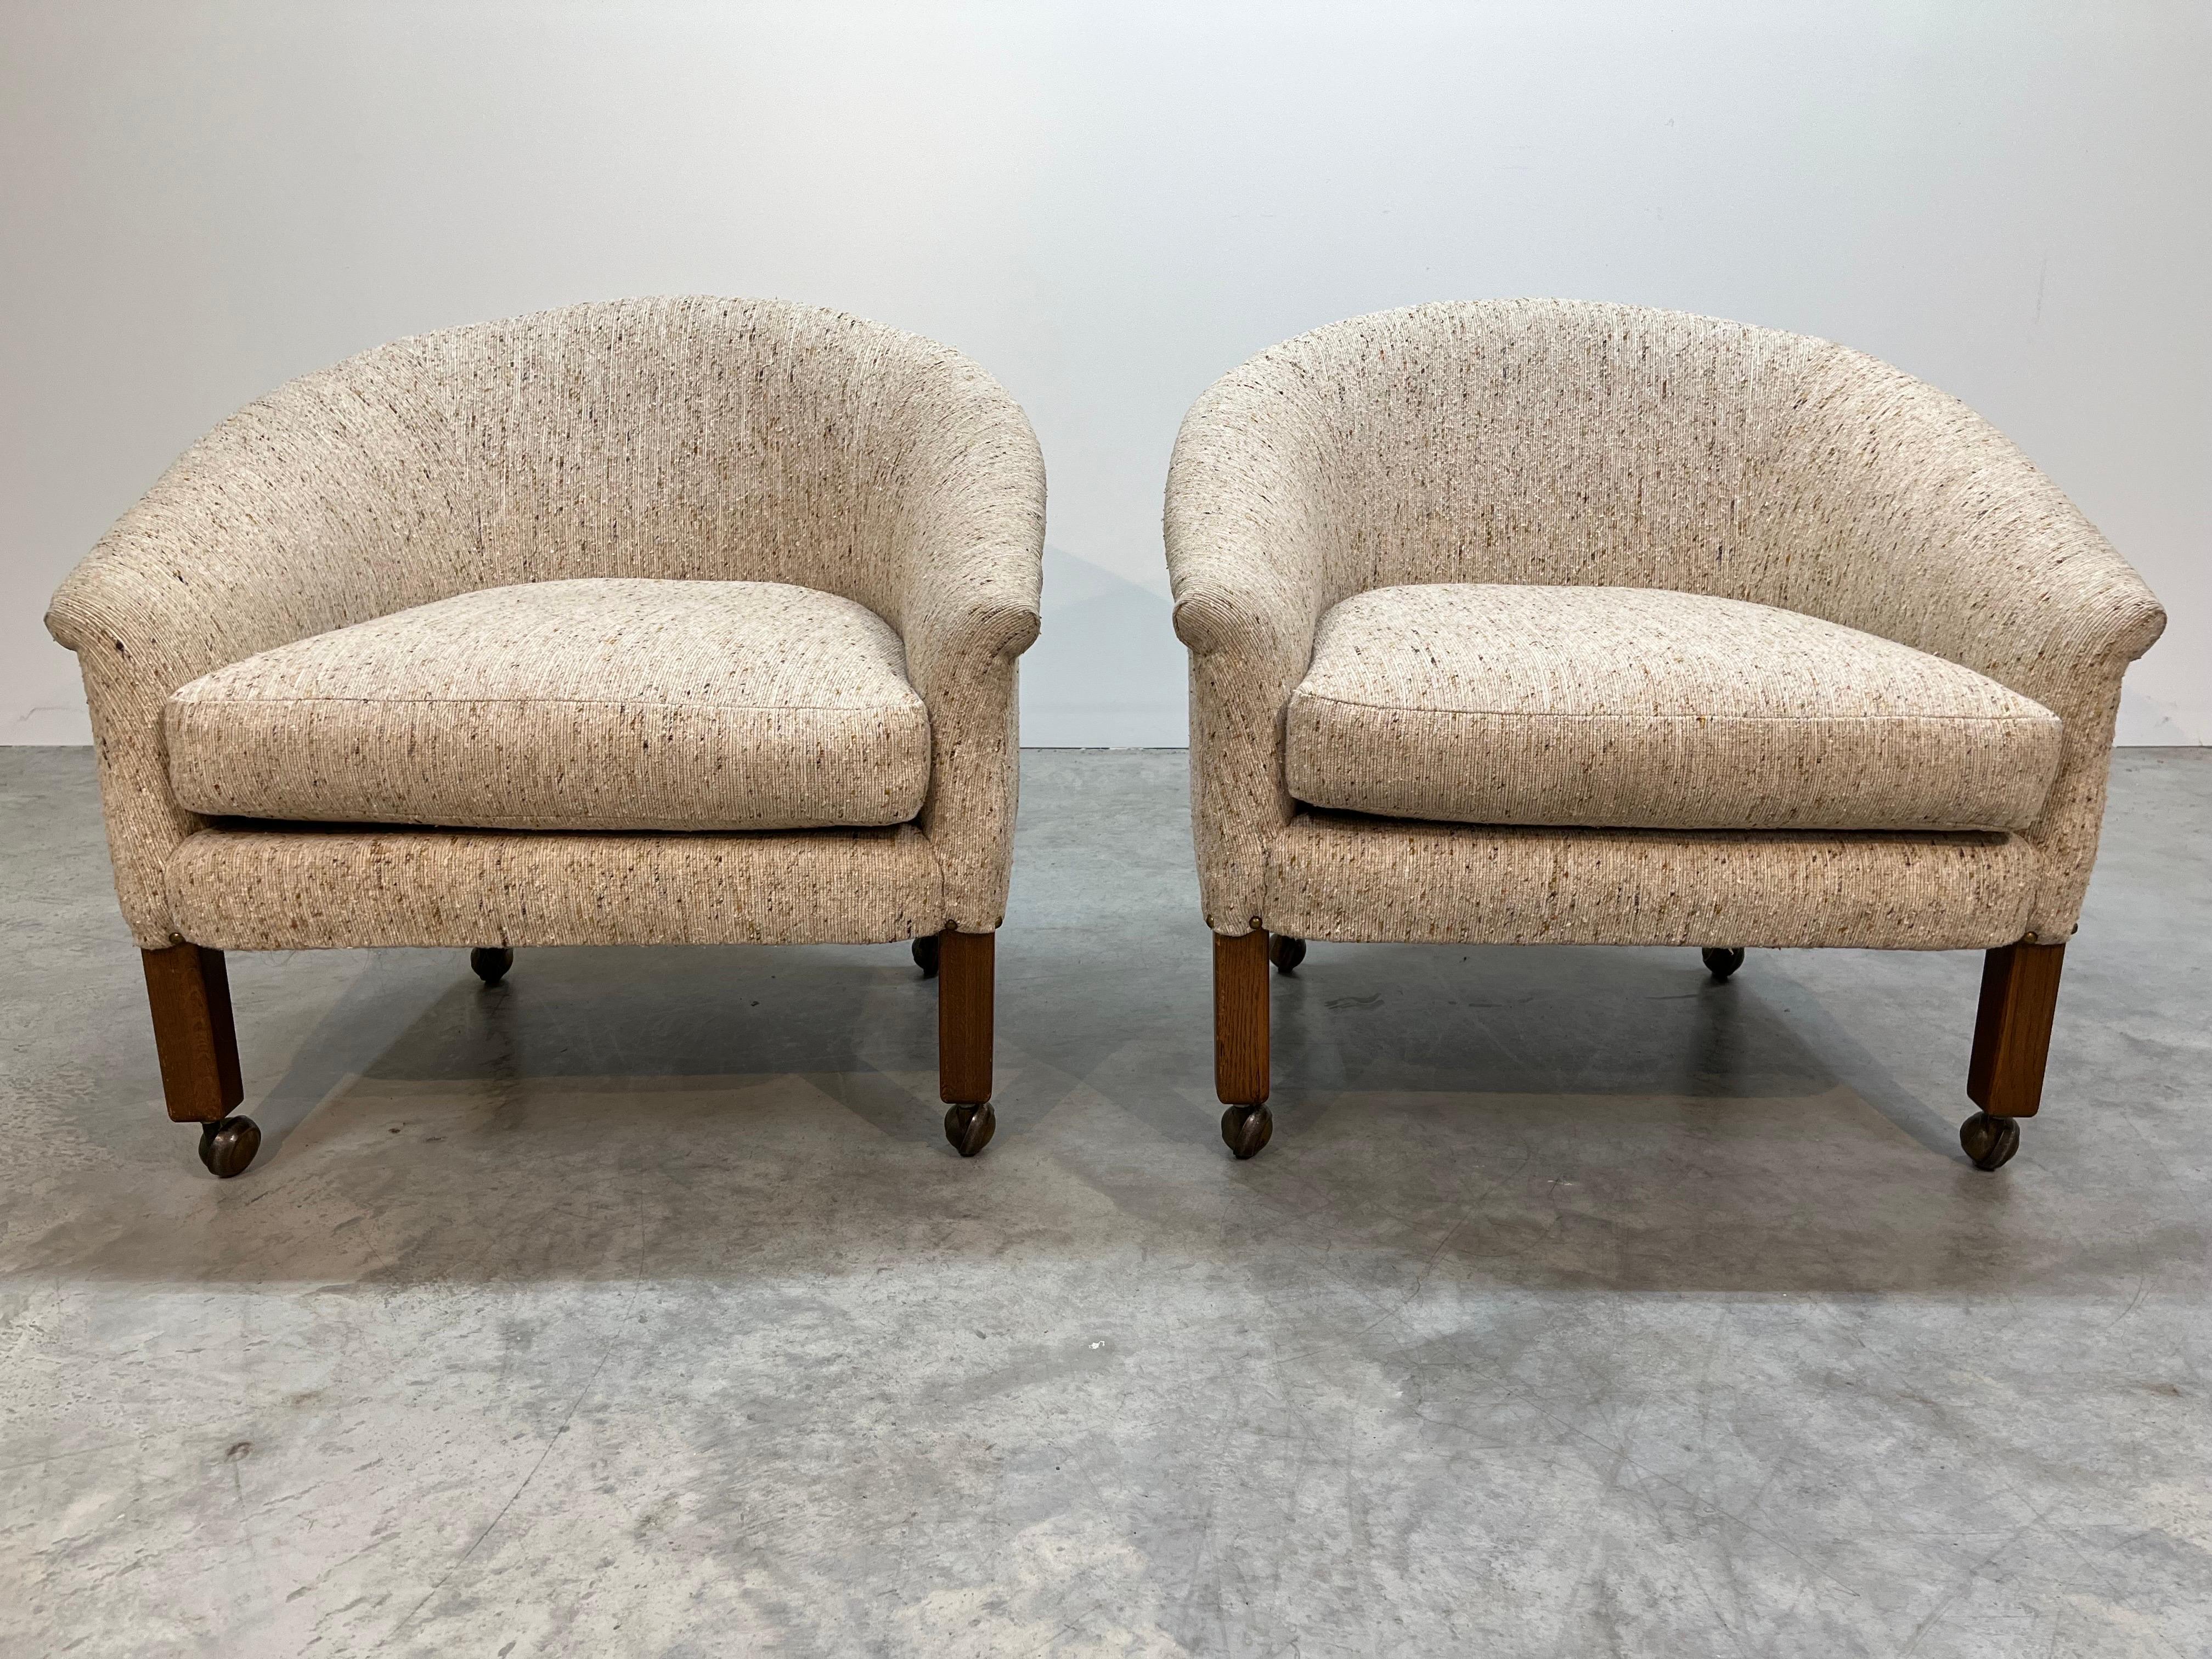 A wonderful pair of mid-century barrel back club chairs having beautiful tweed upholstery over mahogany legs with casters. Produced by Flexsteel circa 1960 and in outstanding original condition. The chairs feature the classic Flexsteel steel